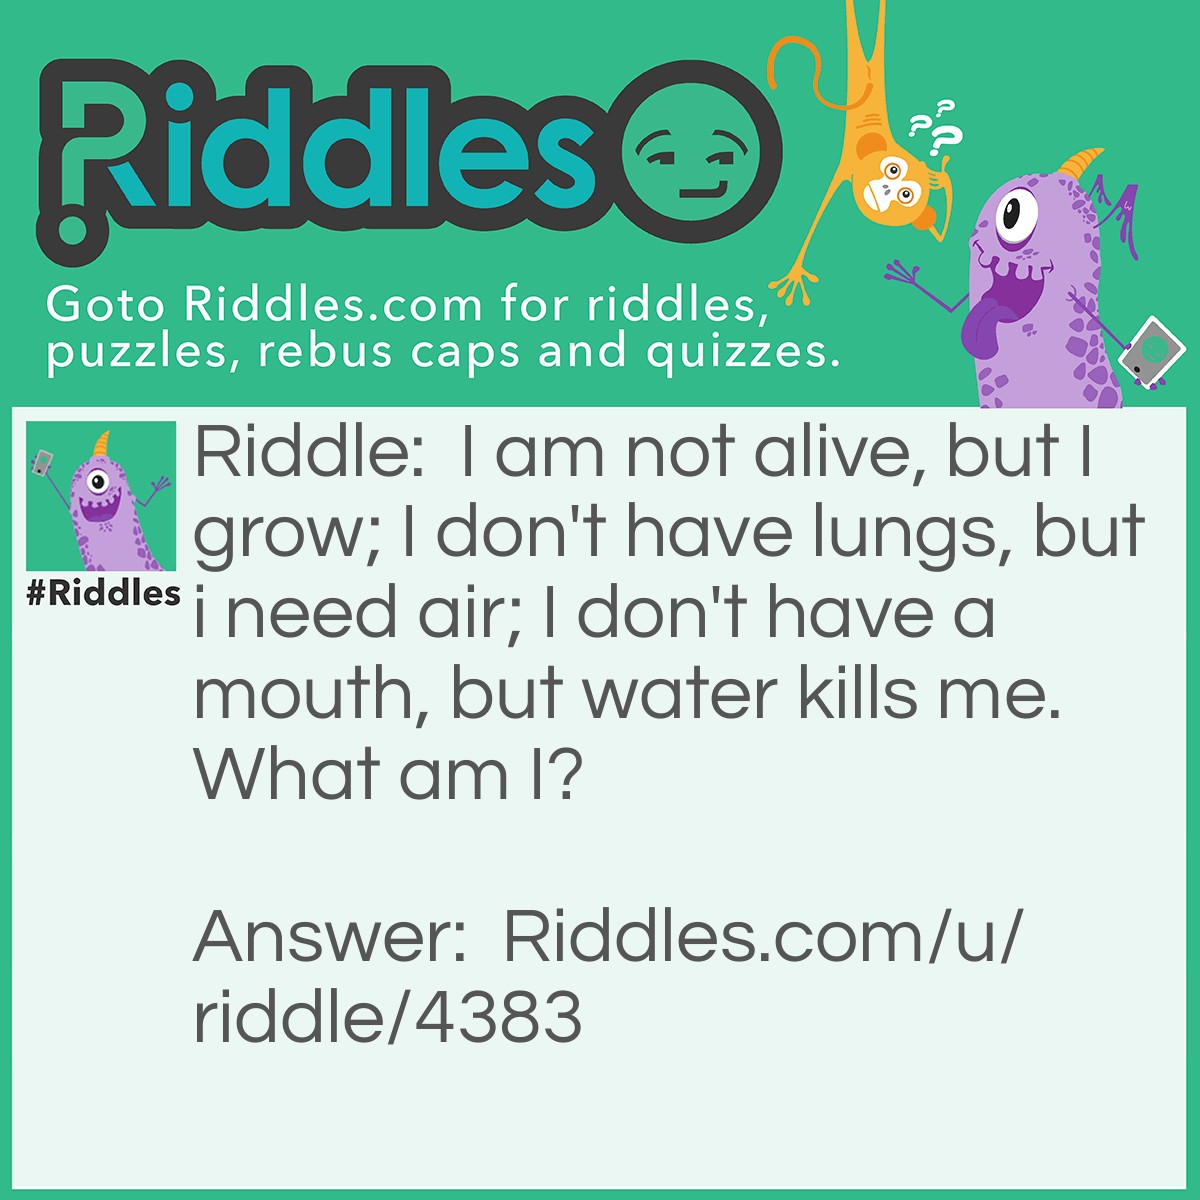 Riddle: I am not alive, but I grow; I don't have lungs, but i need air; I don't have a mouth, but water kills me. What am I? Answer: I am fire.